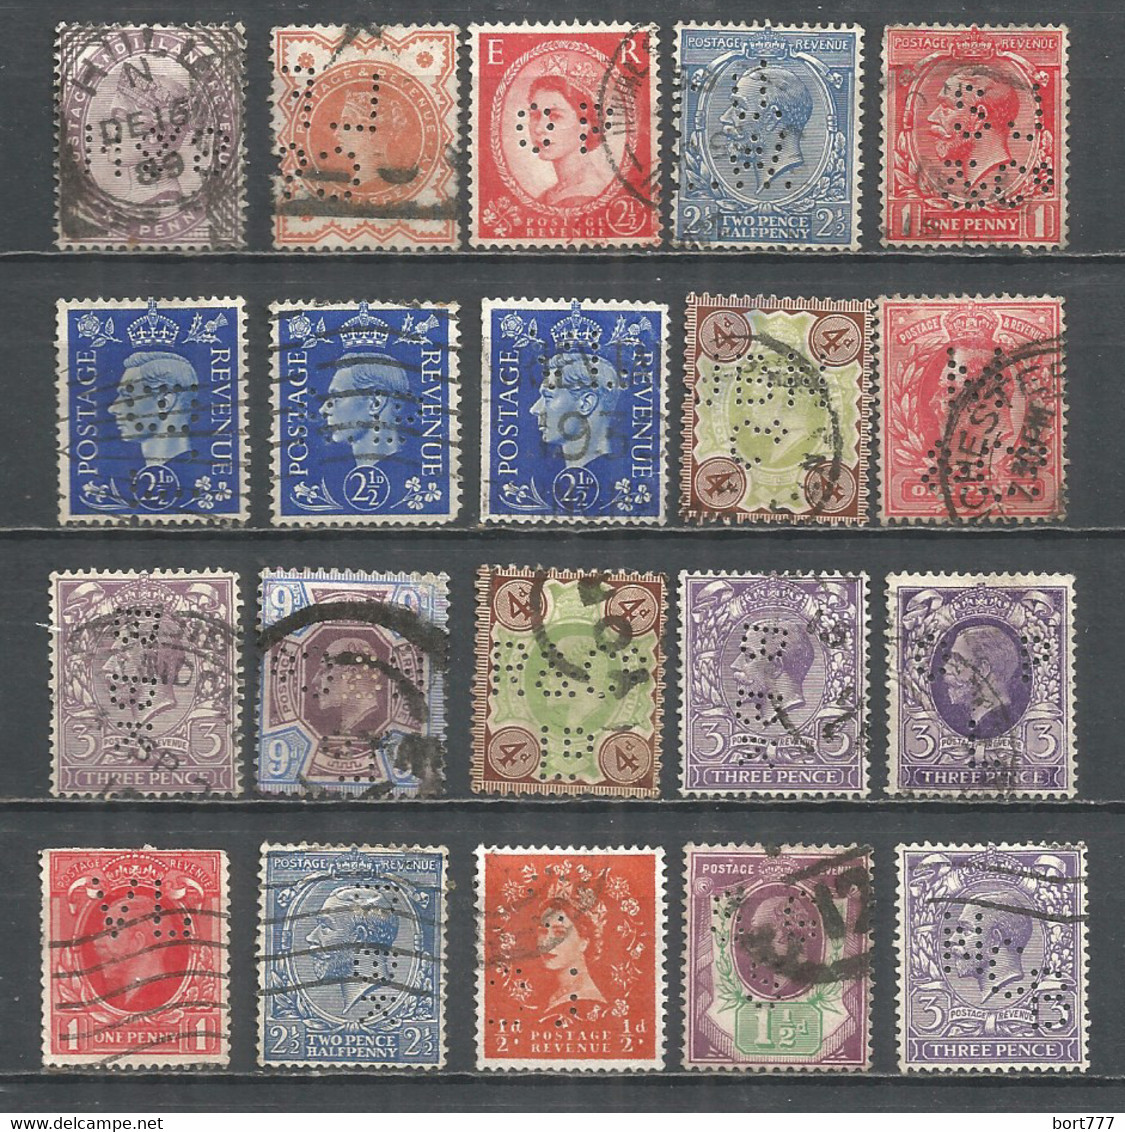 Perfins Great Britain , 20 Old Stamps - Perfin